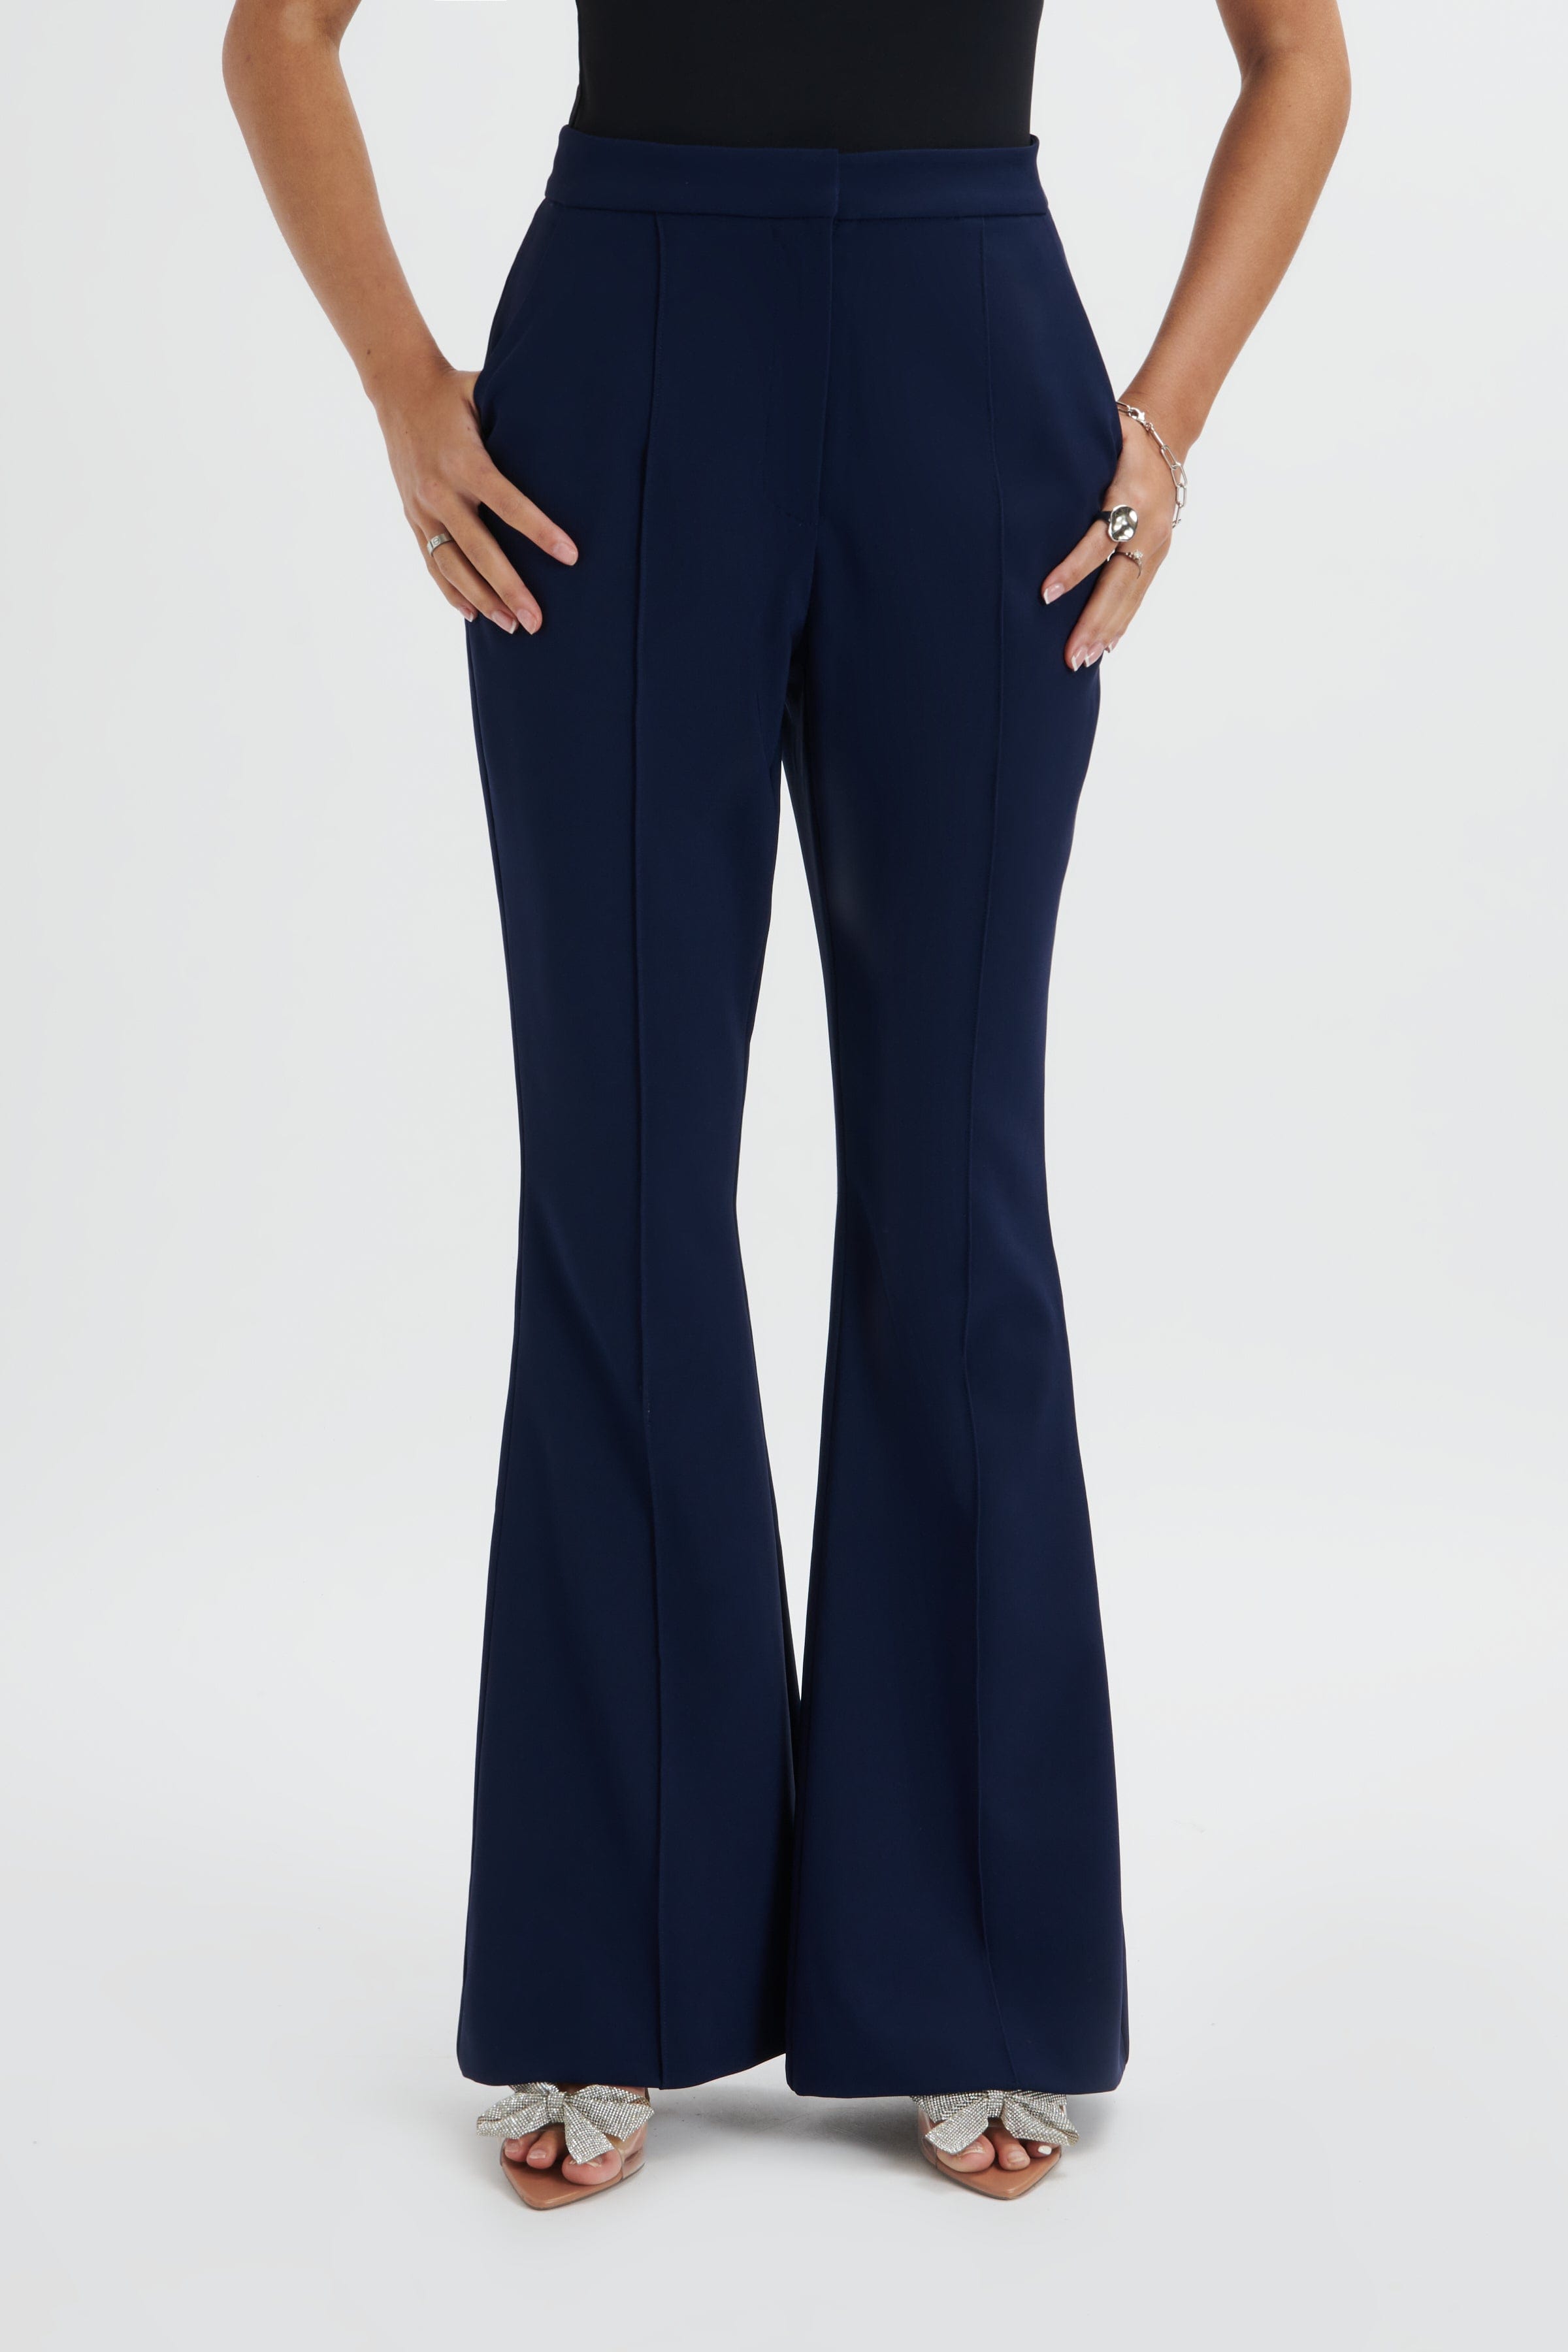 EMELIE Fit & Flare Trousers In Navy